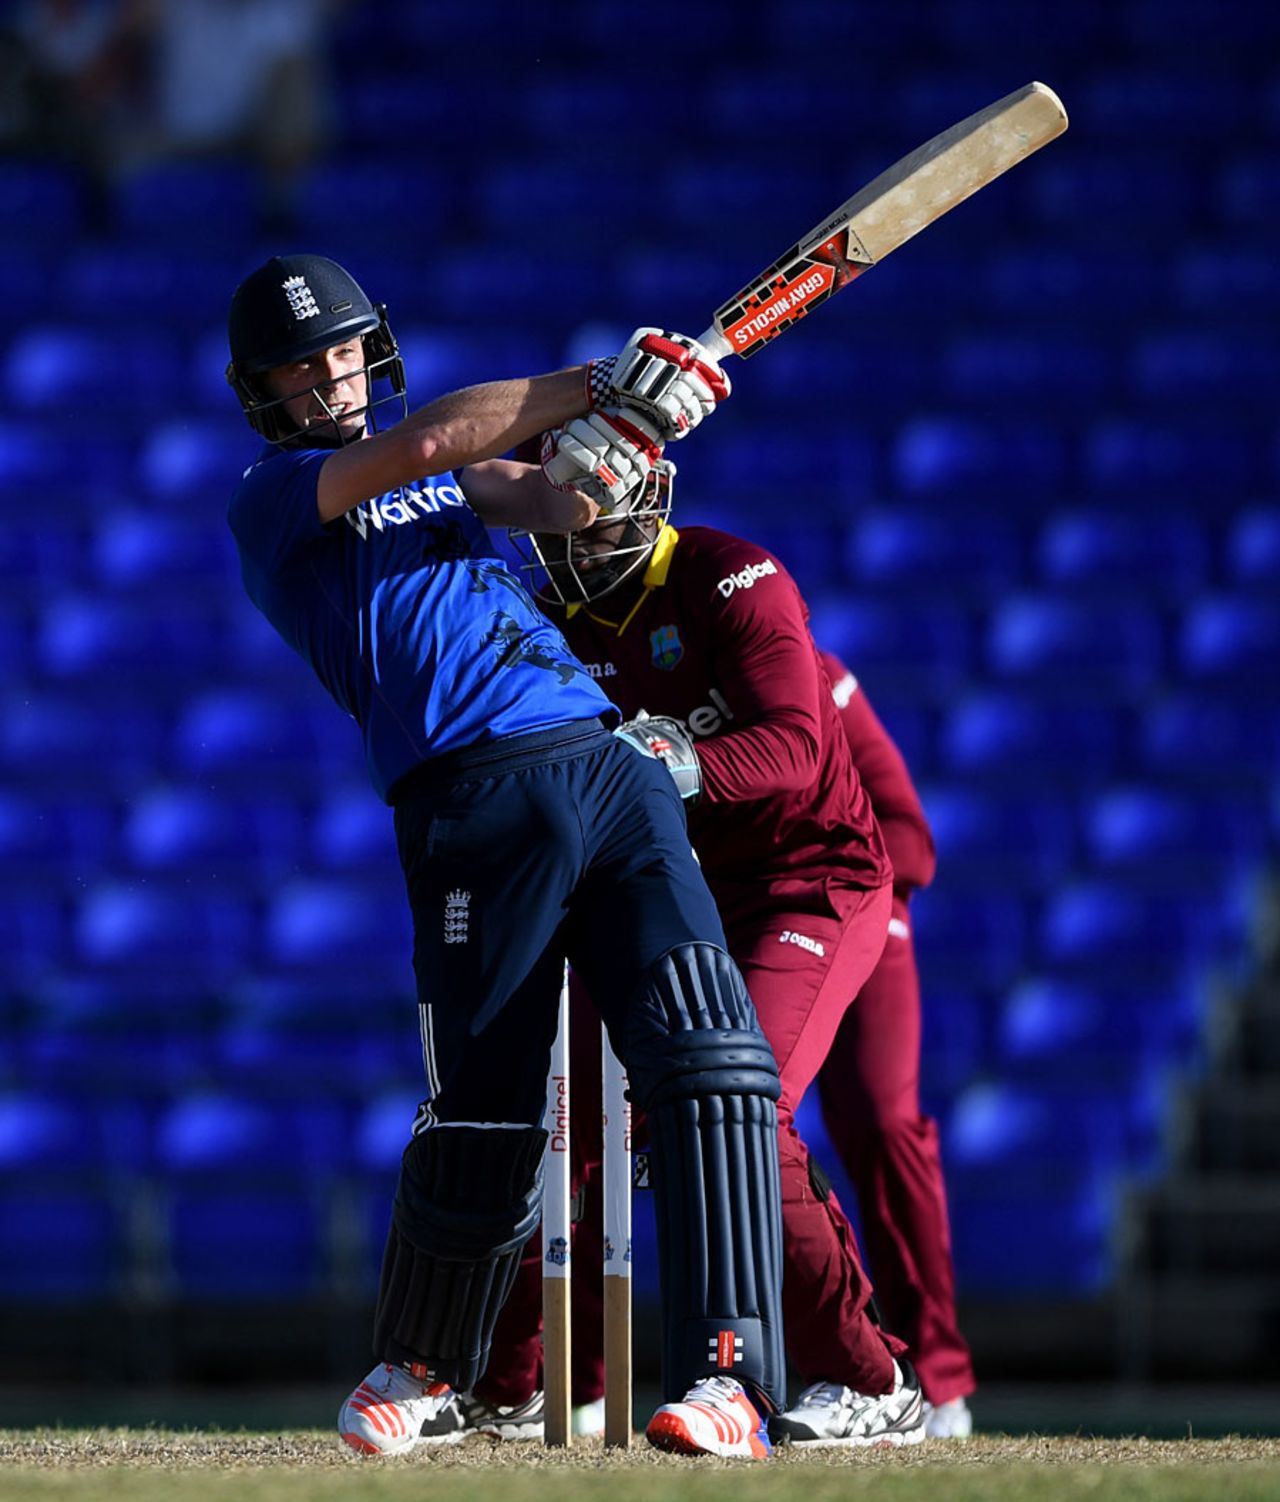 Chris Woakes nursed England over the line, WICB President's XI v England XI, Tour match, St Kitts, February 27, 2017